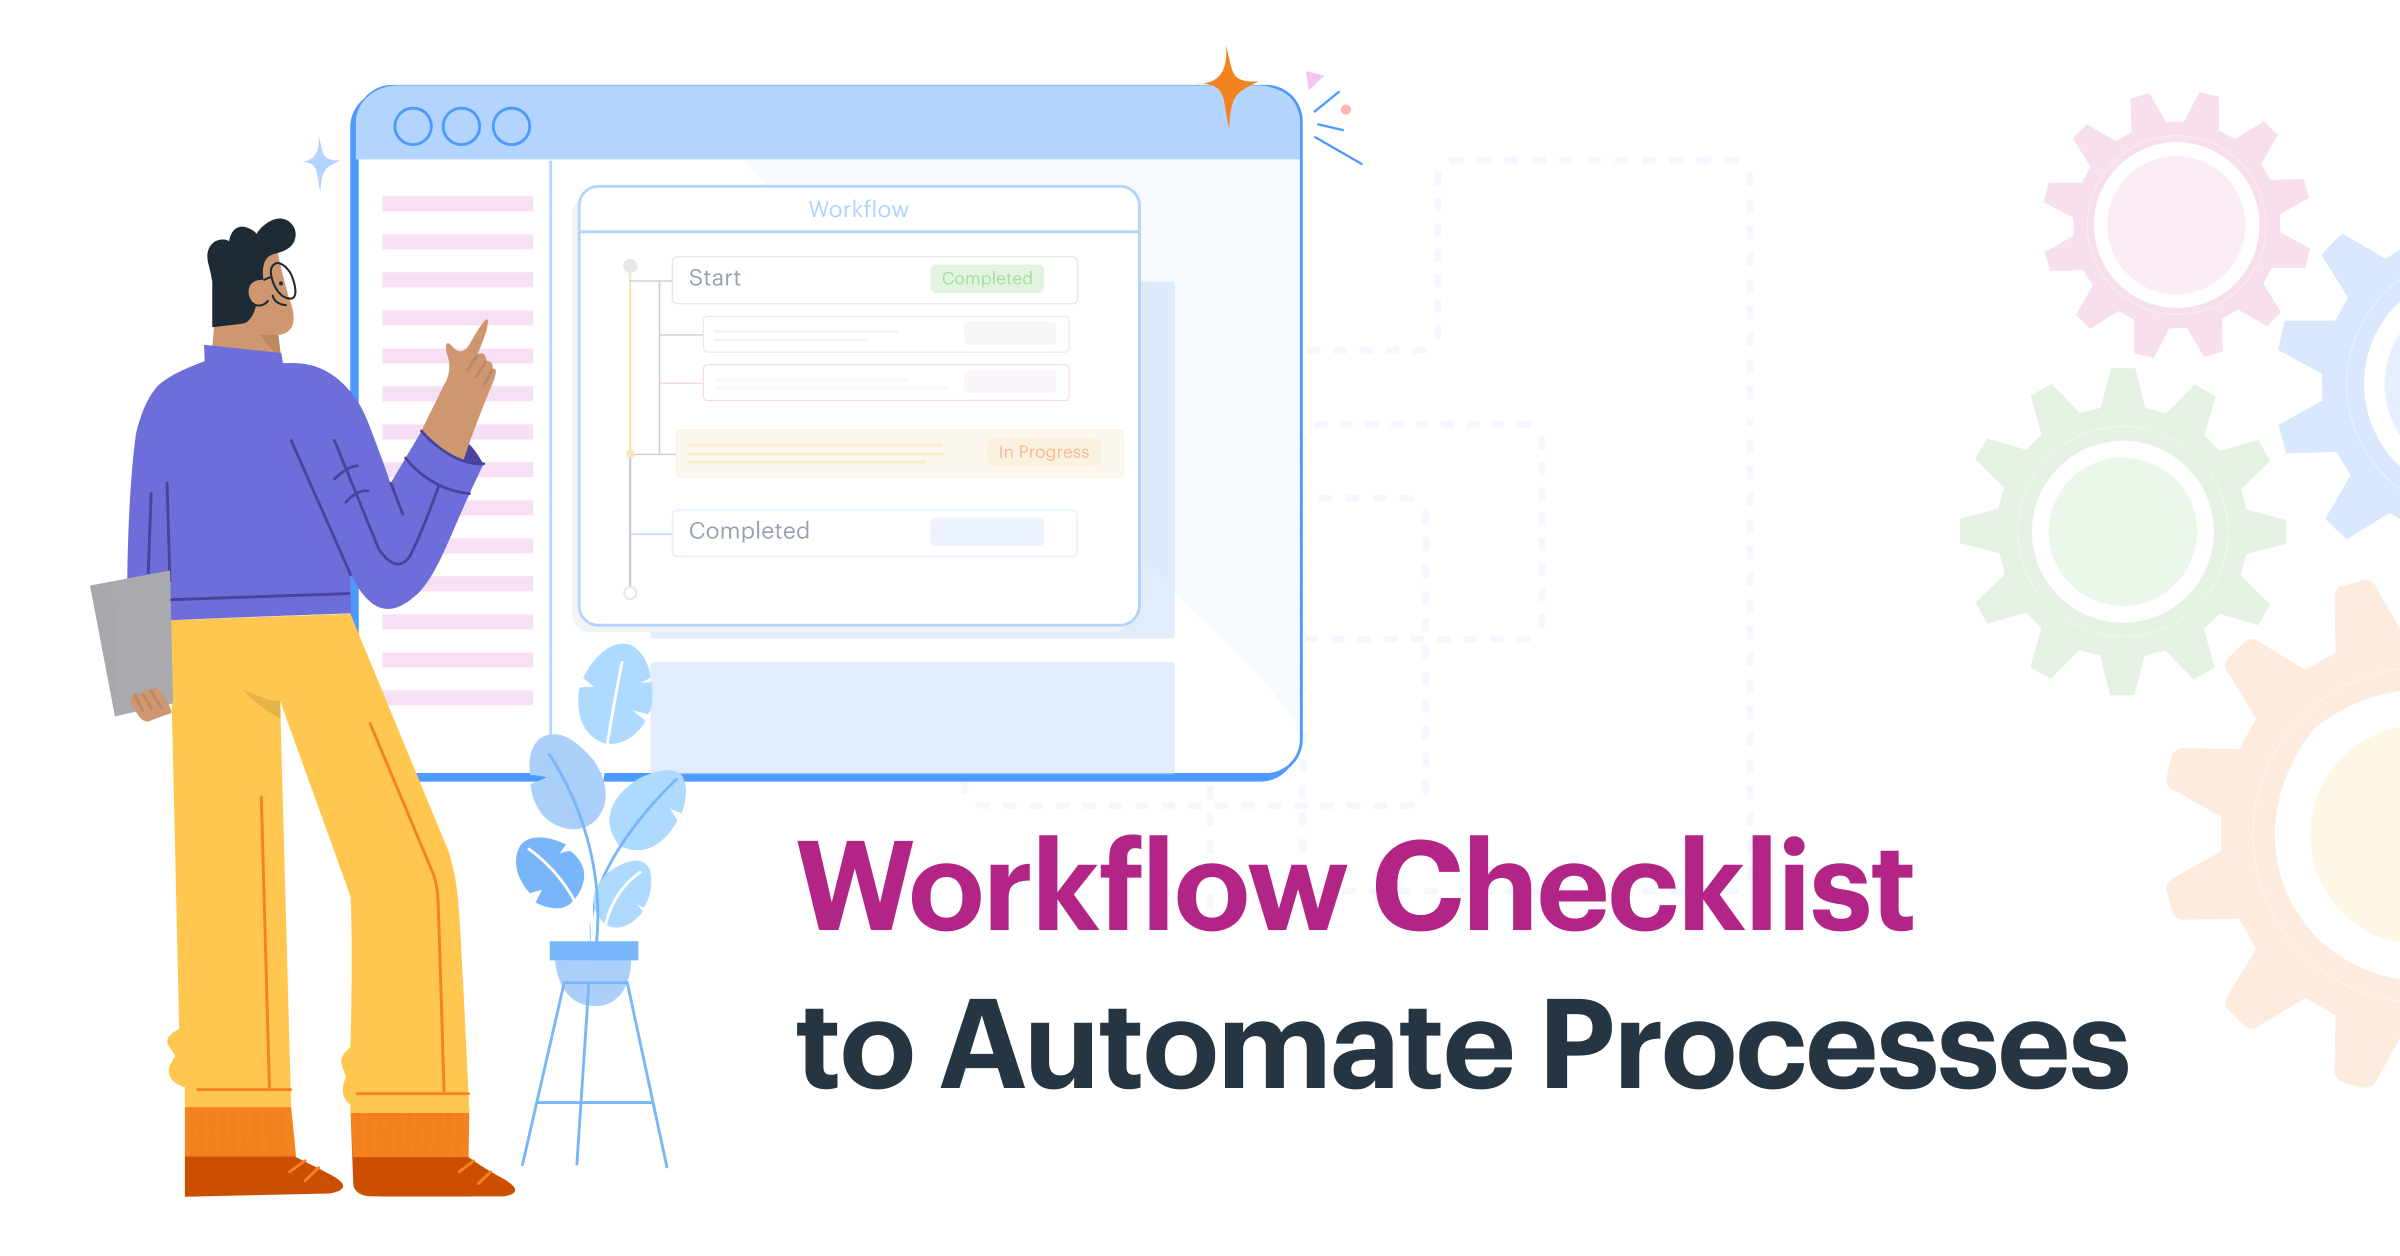 Workflow Checklist to Automate Processes